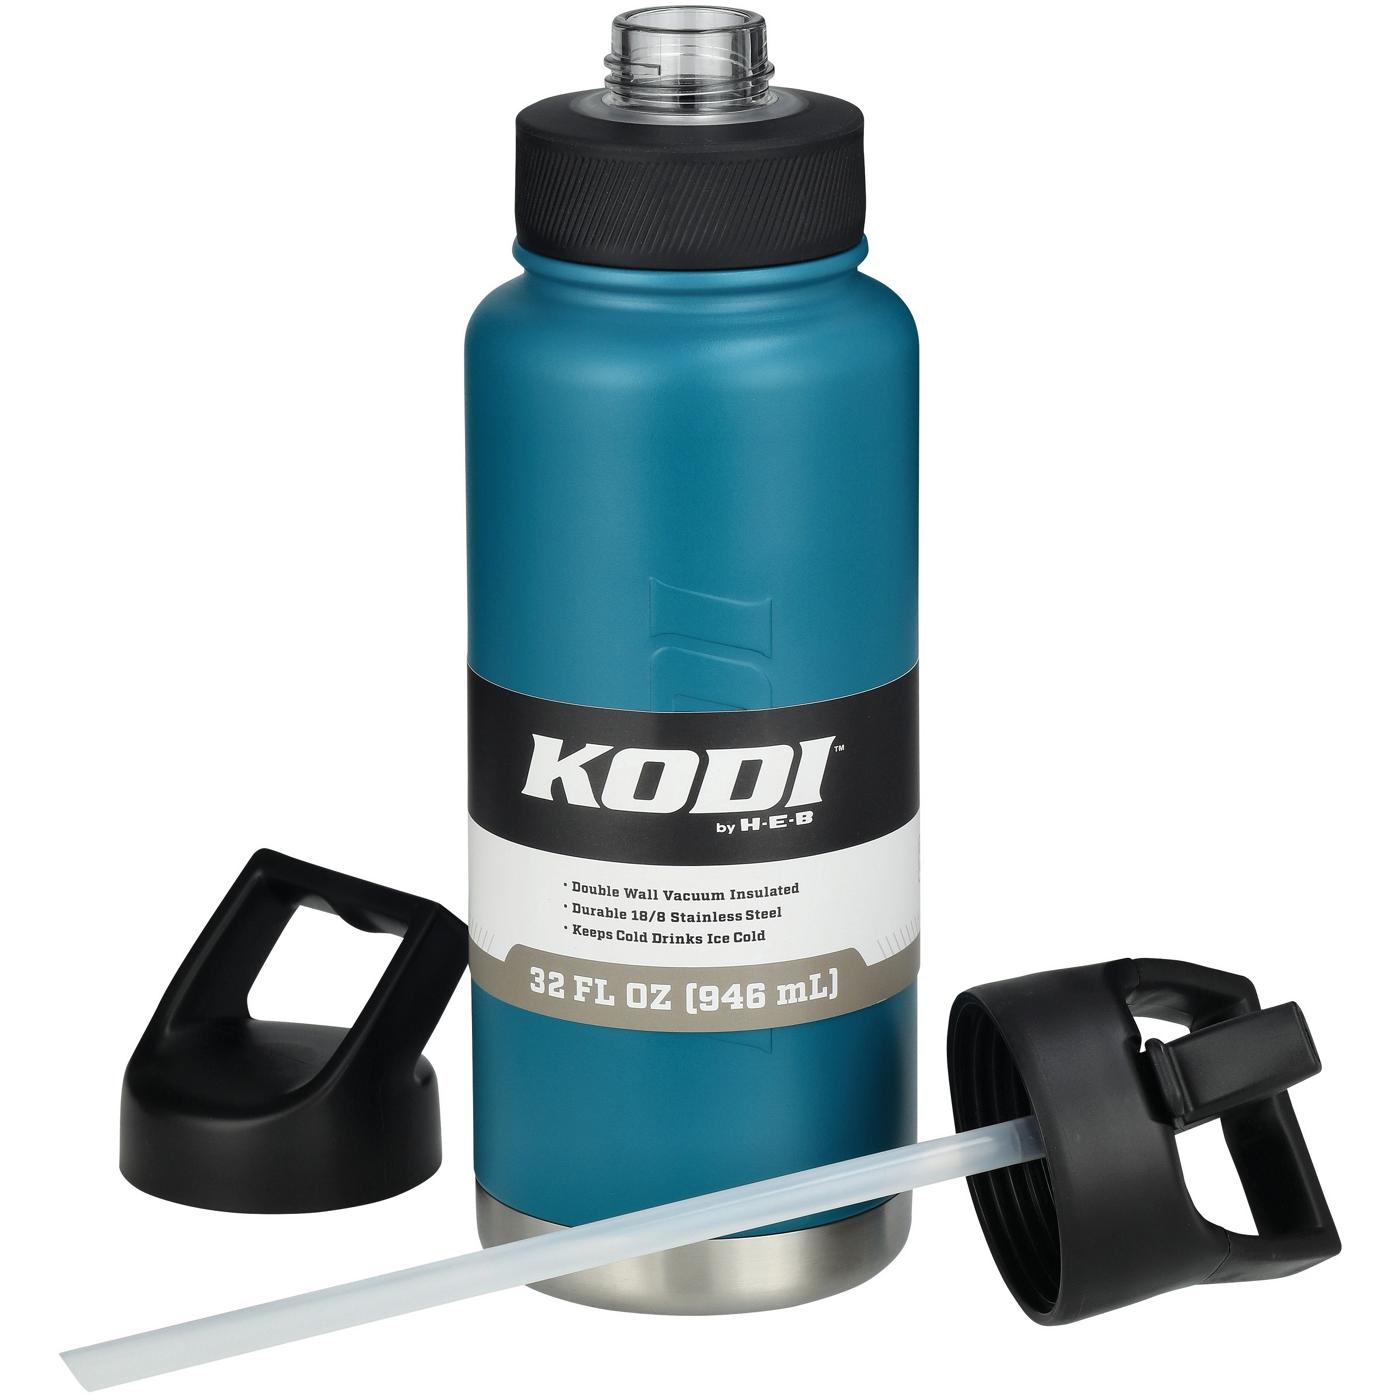 KODI by H-E-B Stainless Steel Water Bottle - Deep Turquoise; image 2 of 2